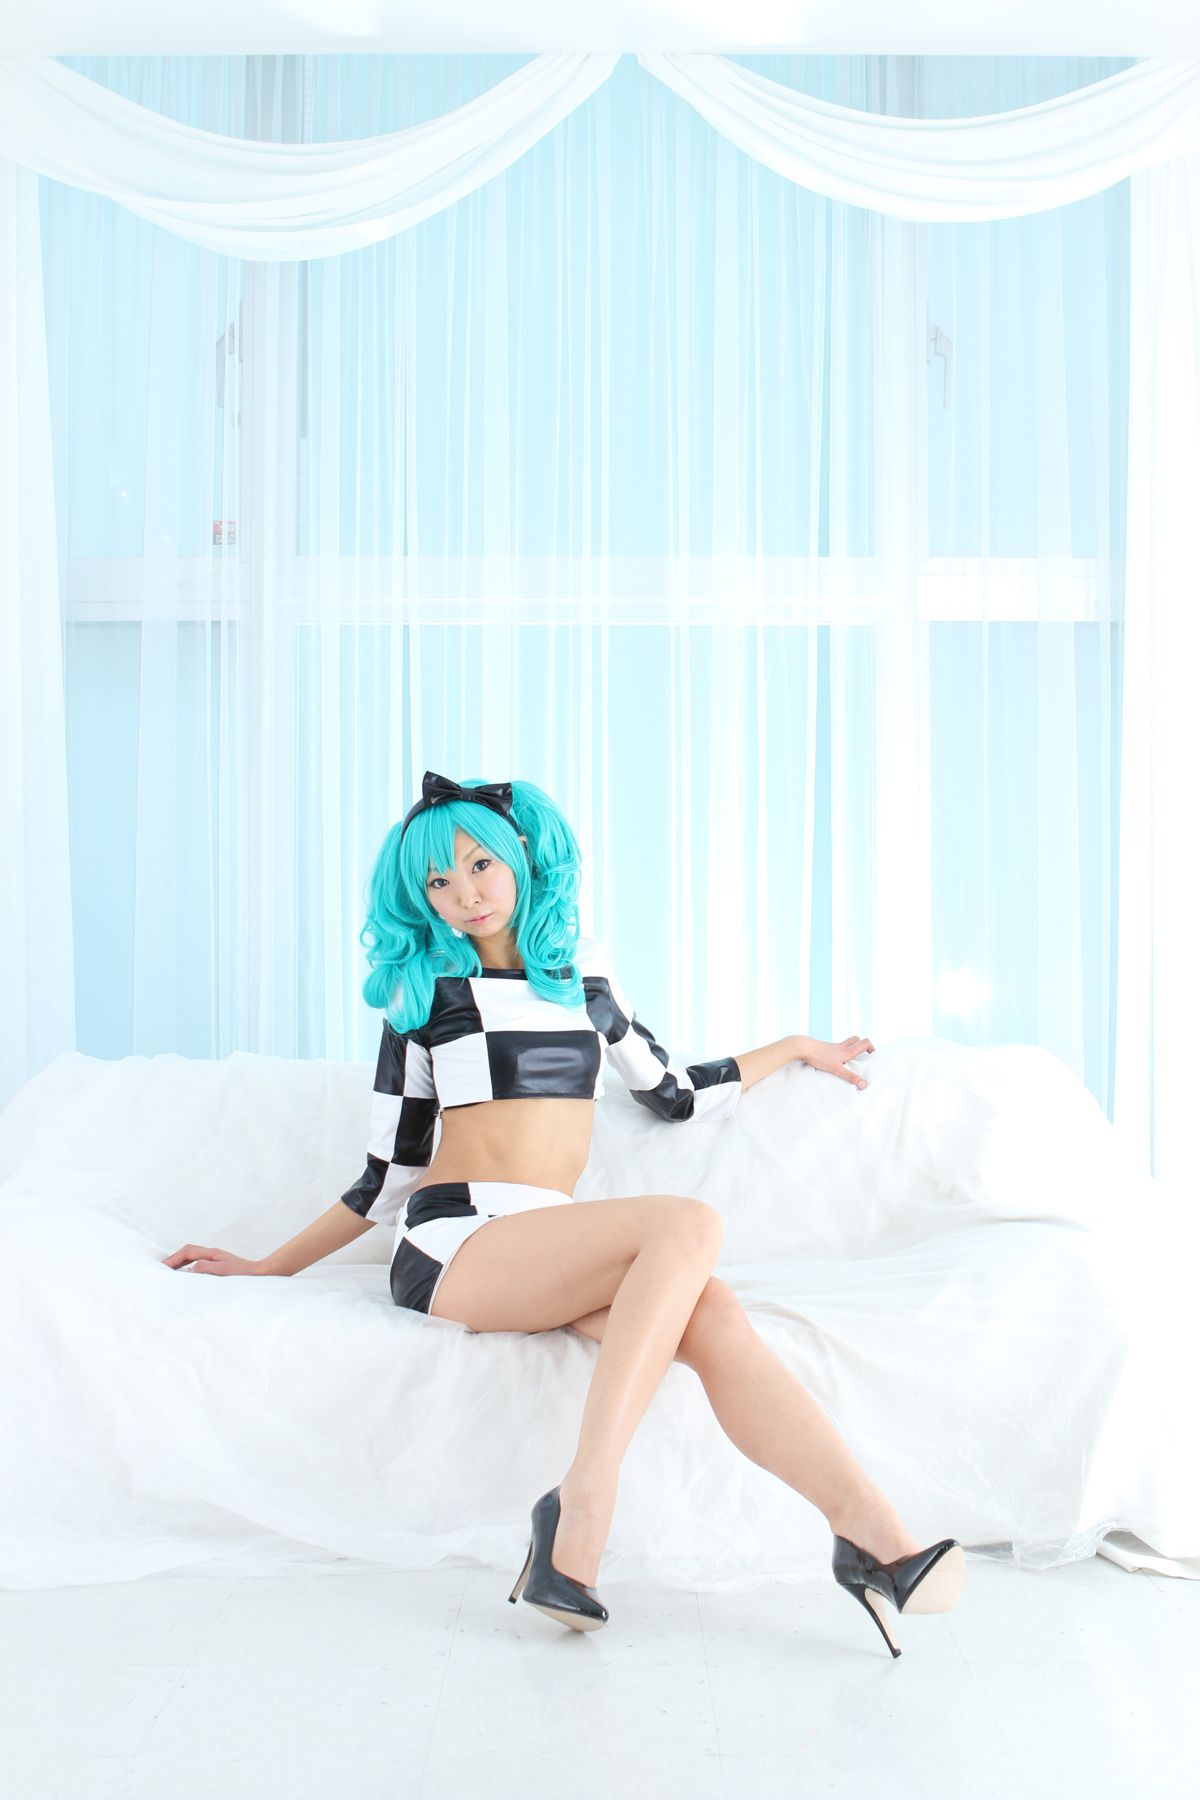 taotuhome[Cosplay套图] New Hatsune Miku from Vocaloid - So Sexy第5张